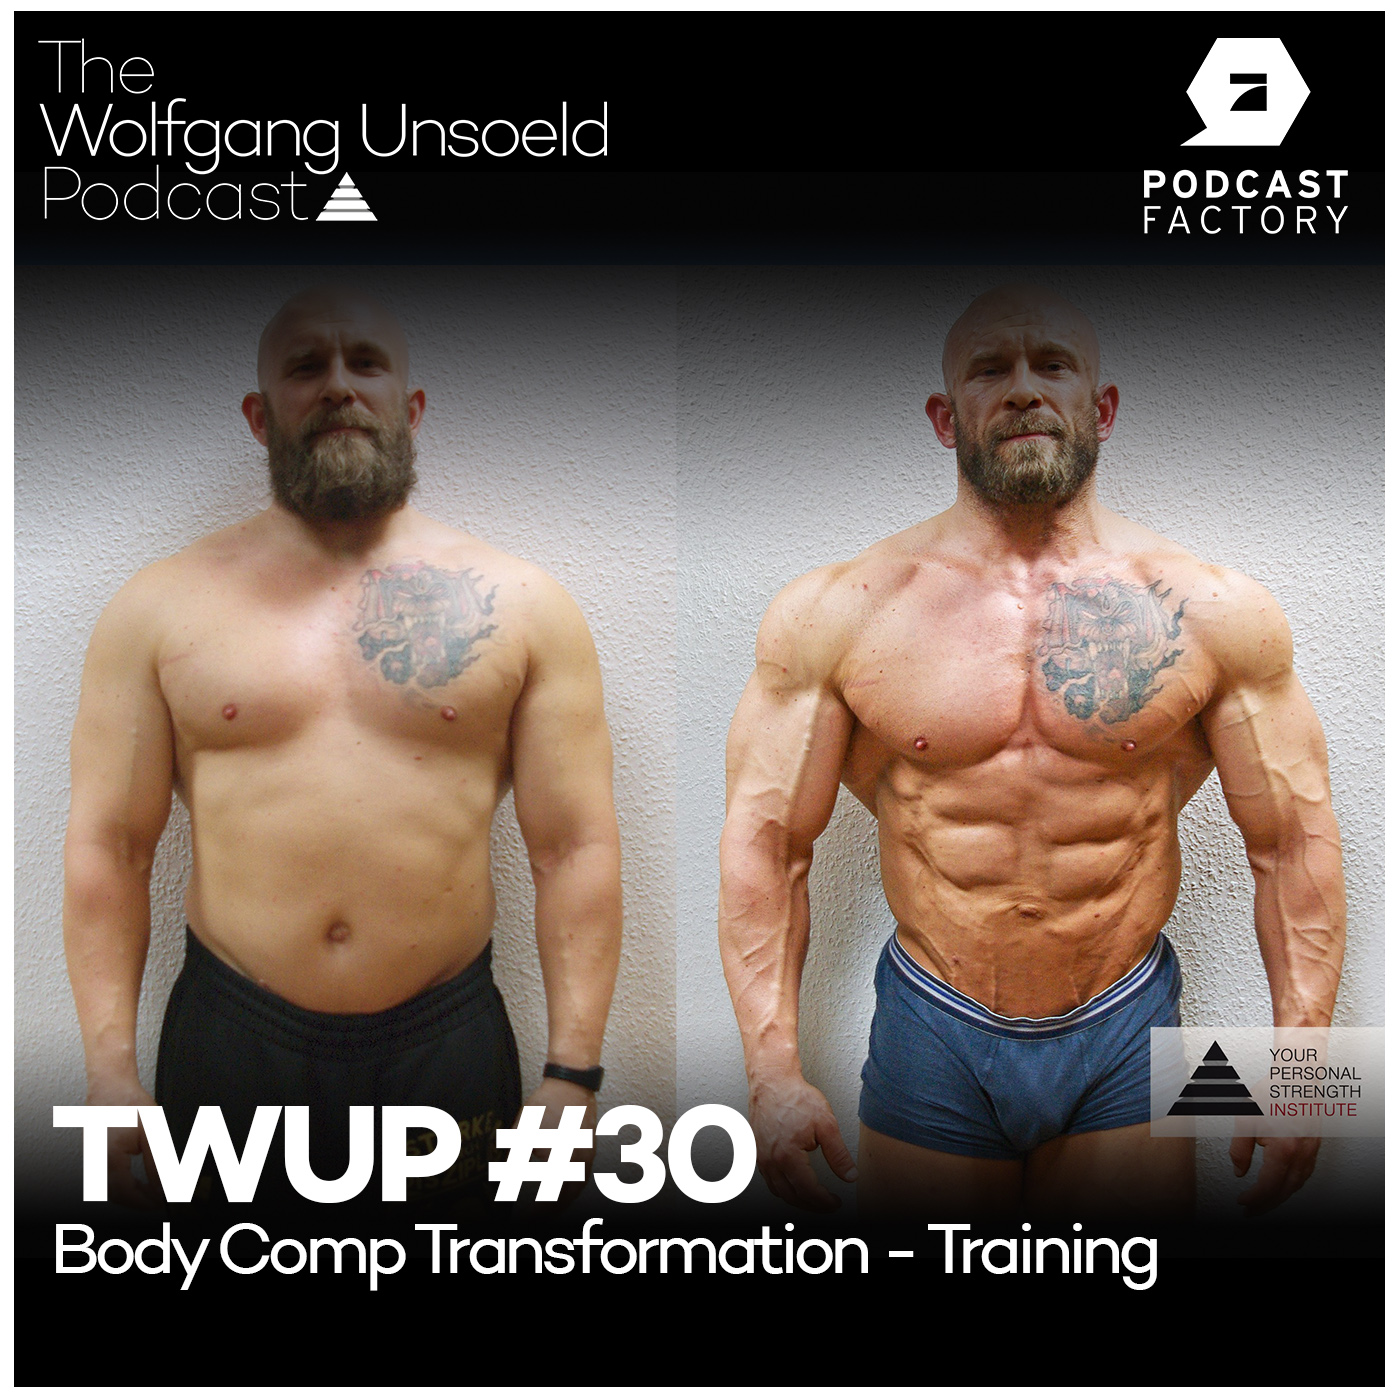 Body Comp Transformation - Training - TWUP #30 - Therapie